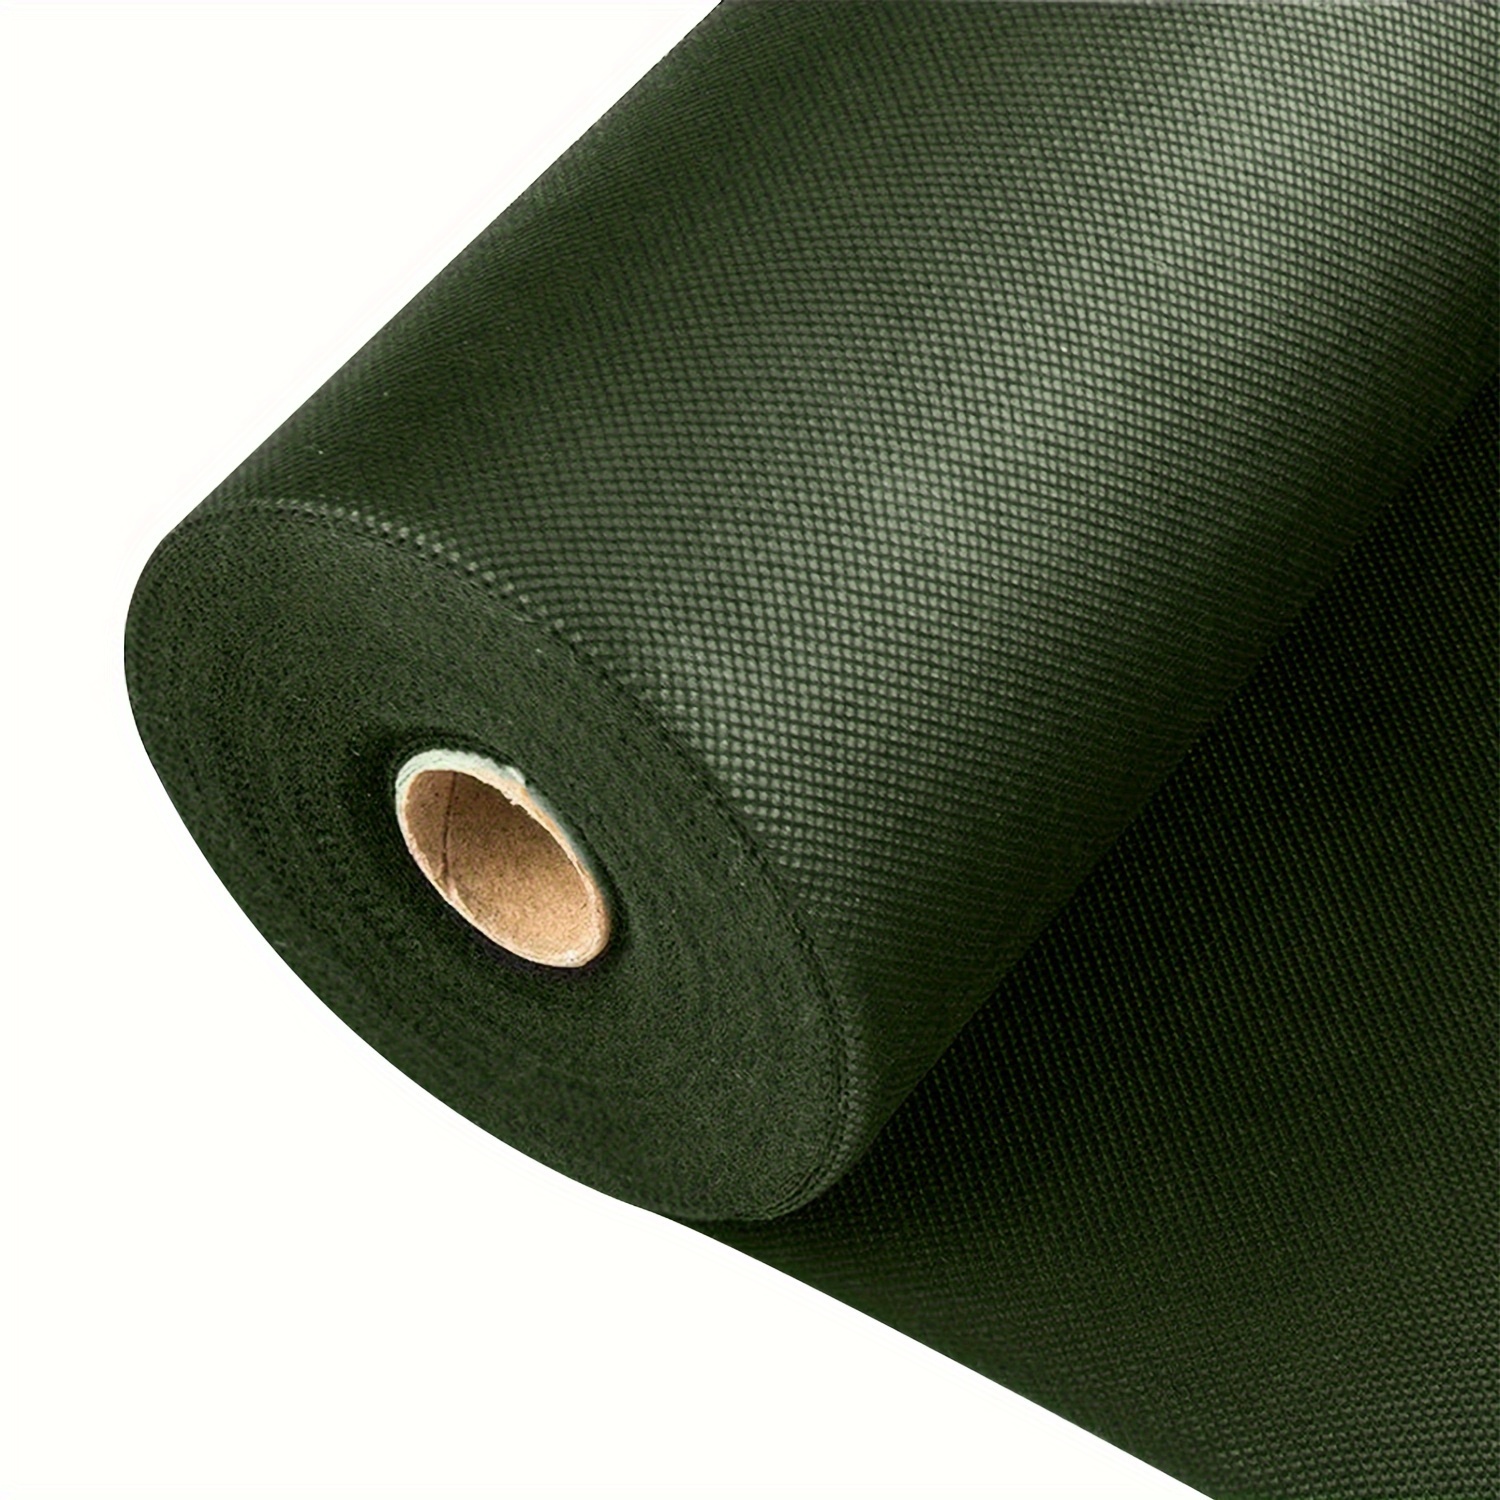 

1 Pack, Non-woven Landscape Fabric Weed Barrier Cloth, Heavy Duty Garden Weed Barrier Fabric Roll, Landscape Fabric Weed Control For Ground Cover, Garden Fabric, French Drains, Dark Green